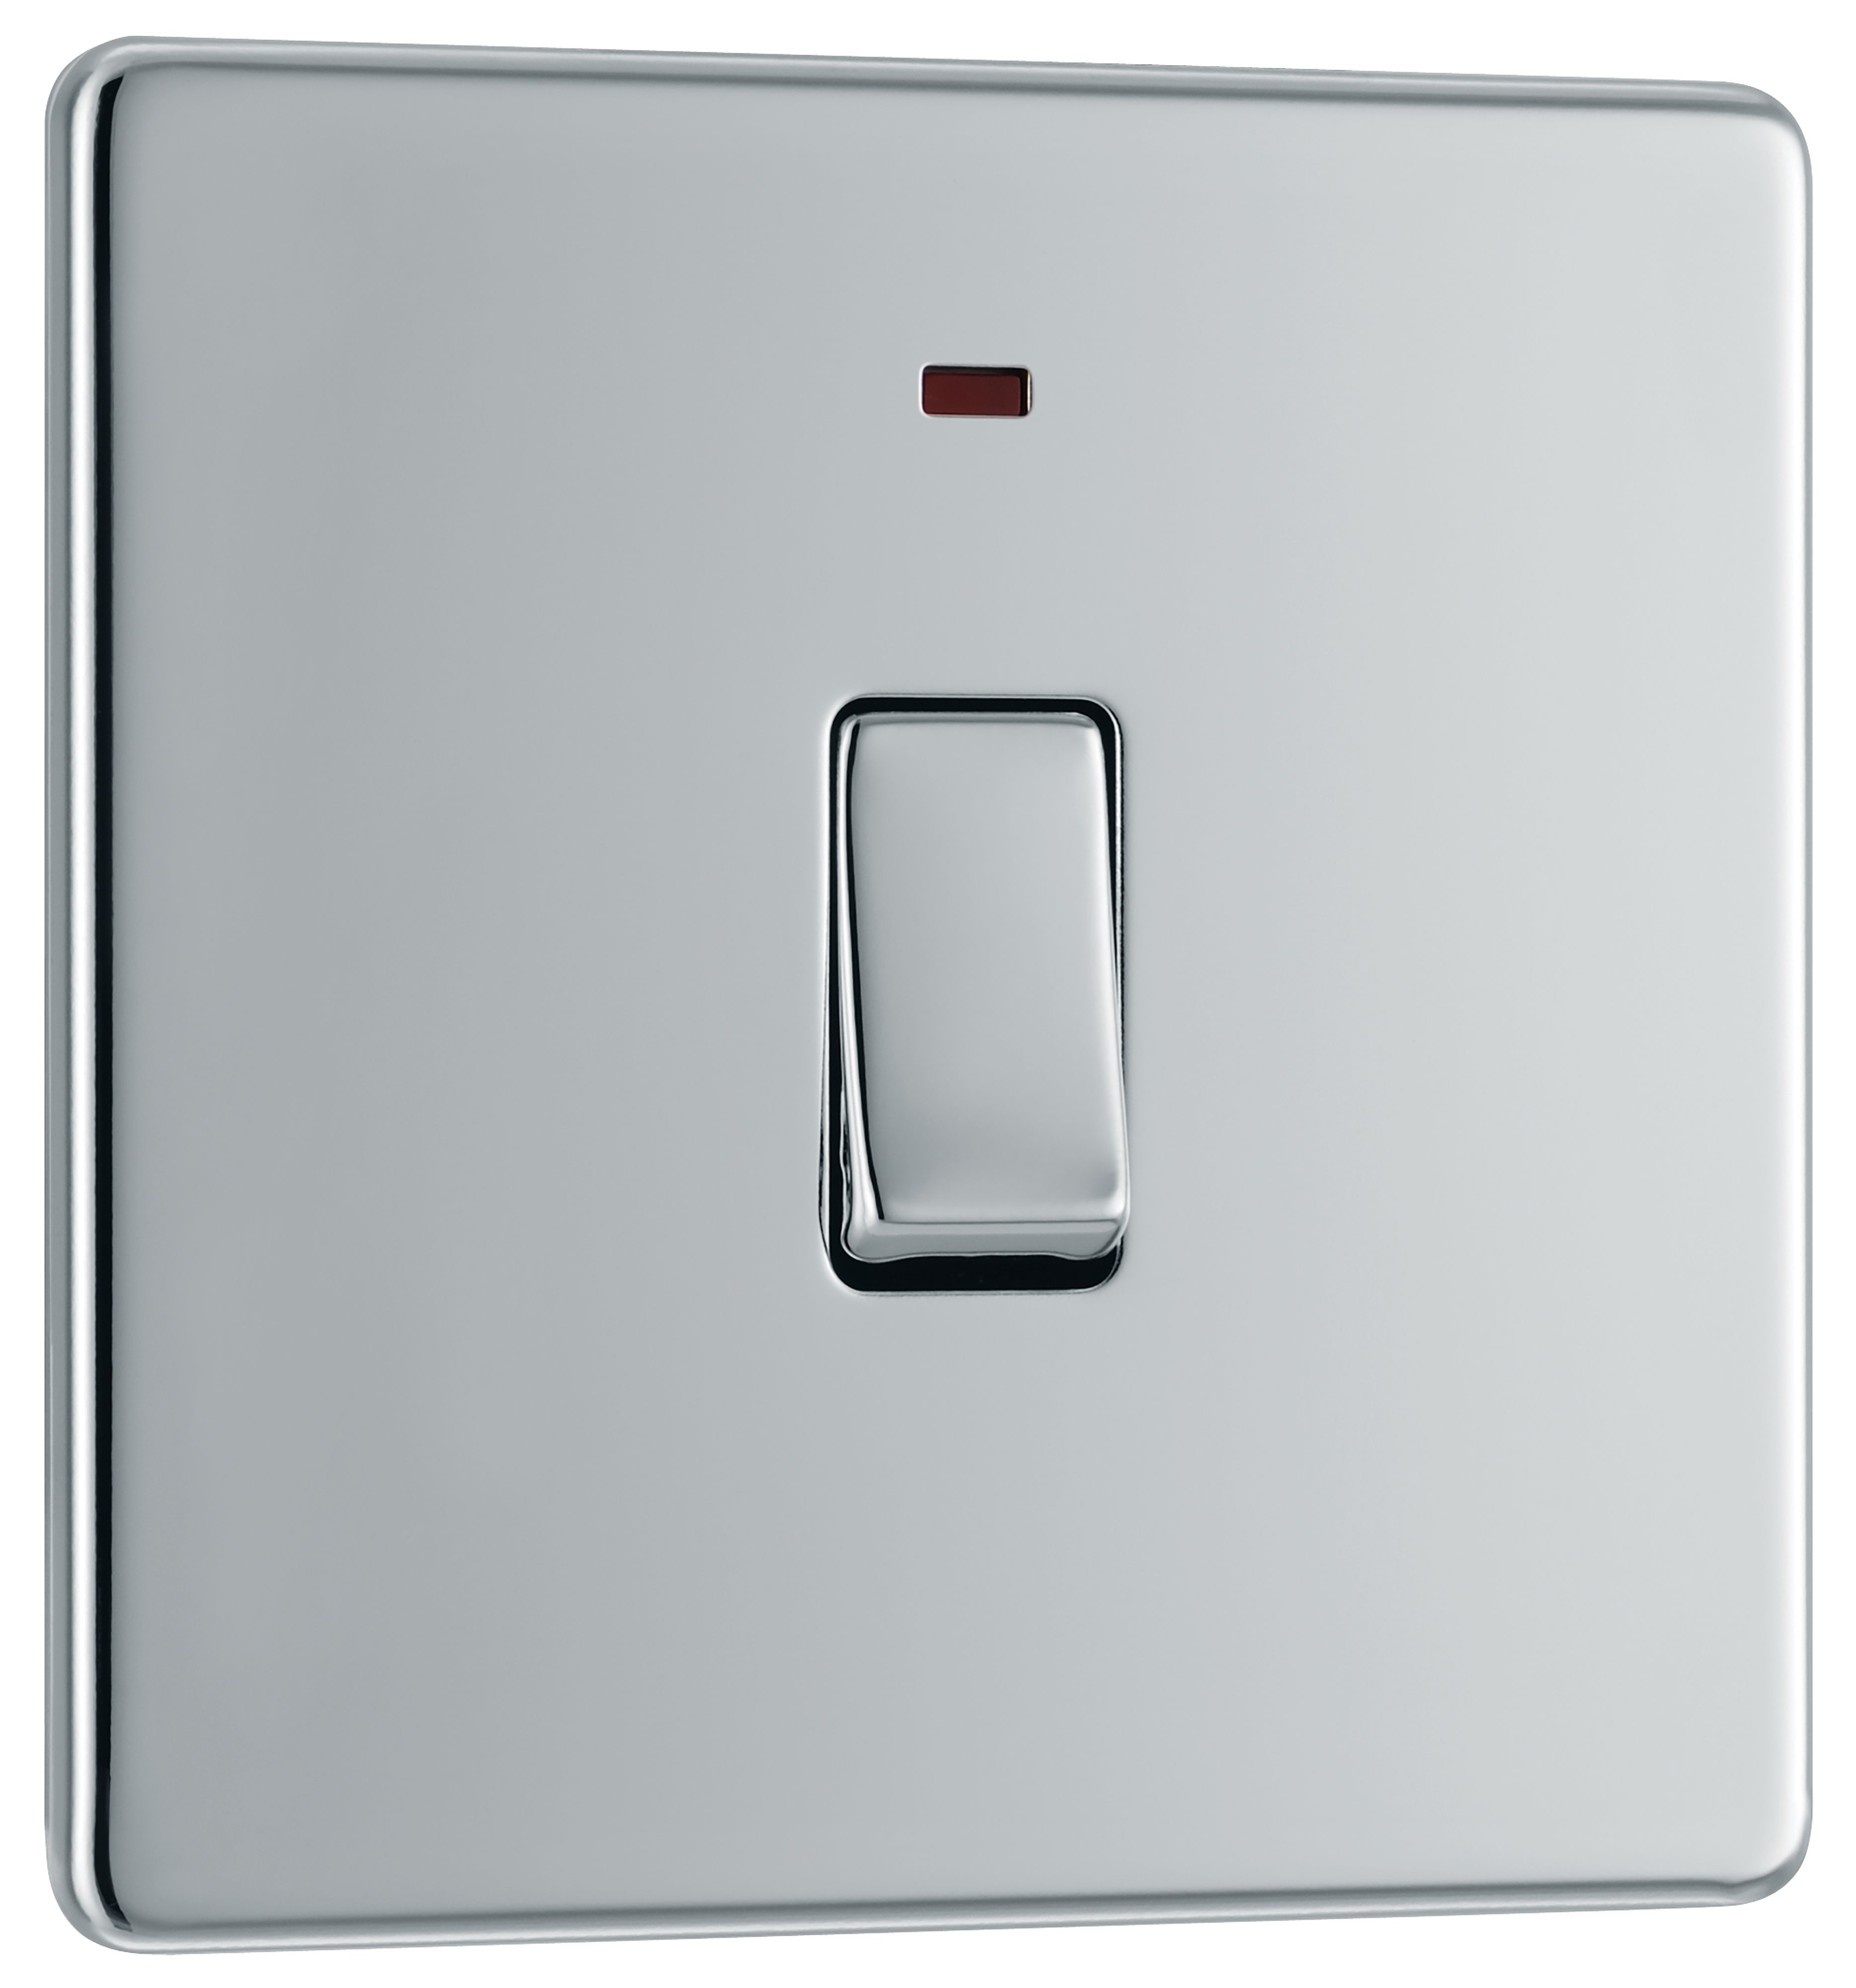 GoodHome 20A Rocker Flat Control switch with LED indicator Chrome effect